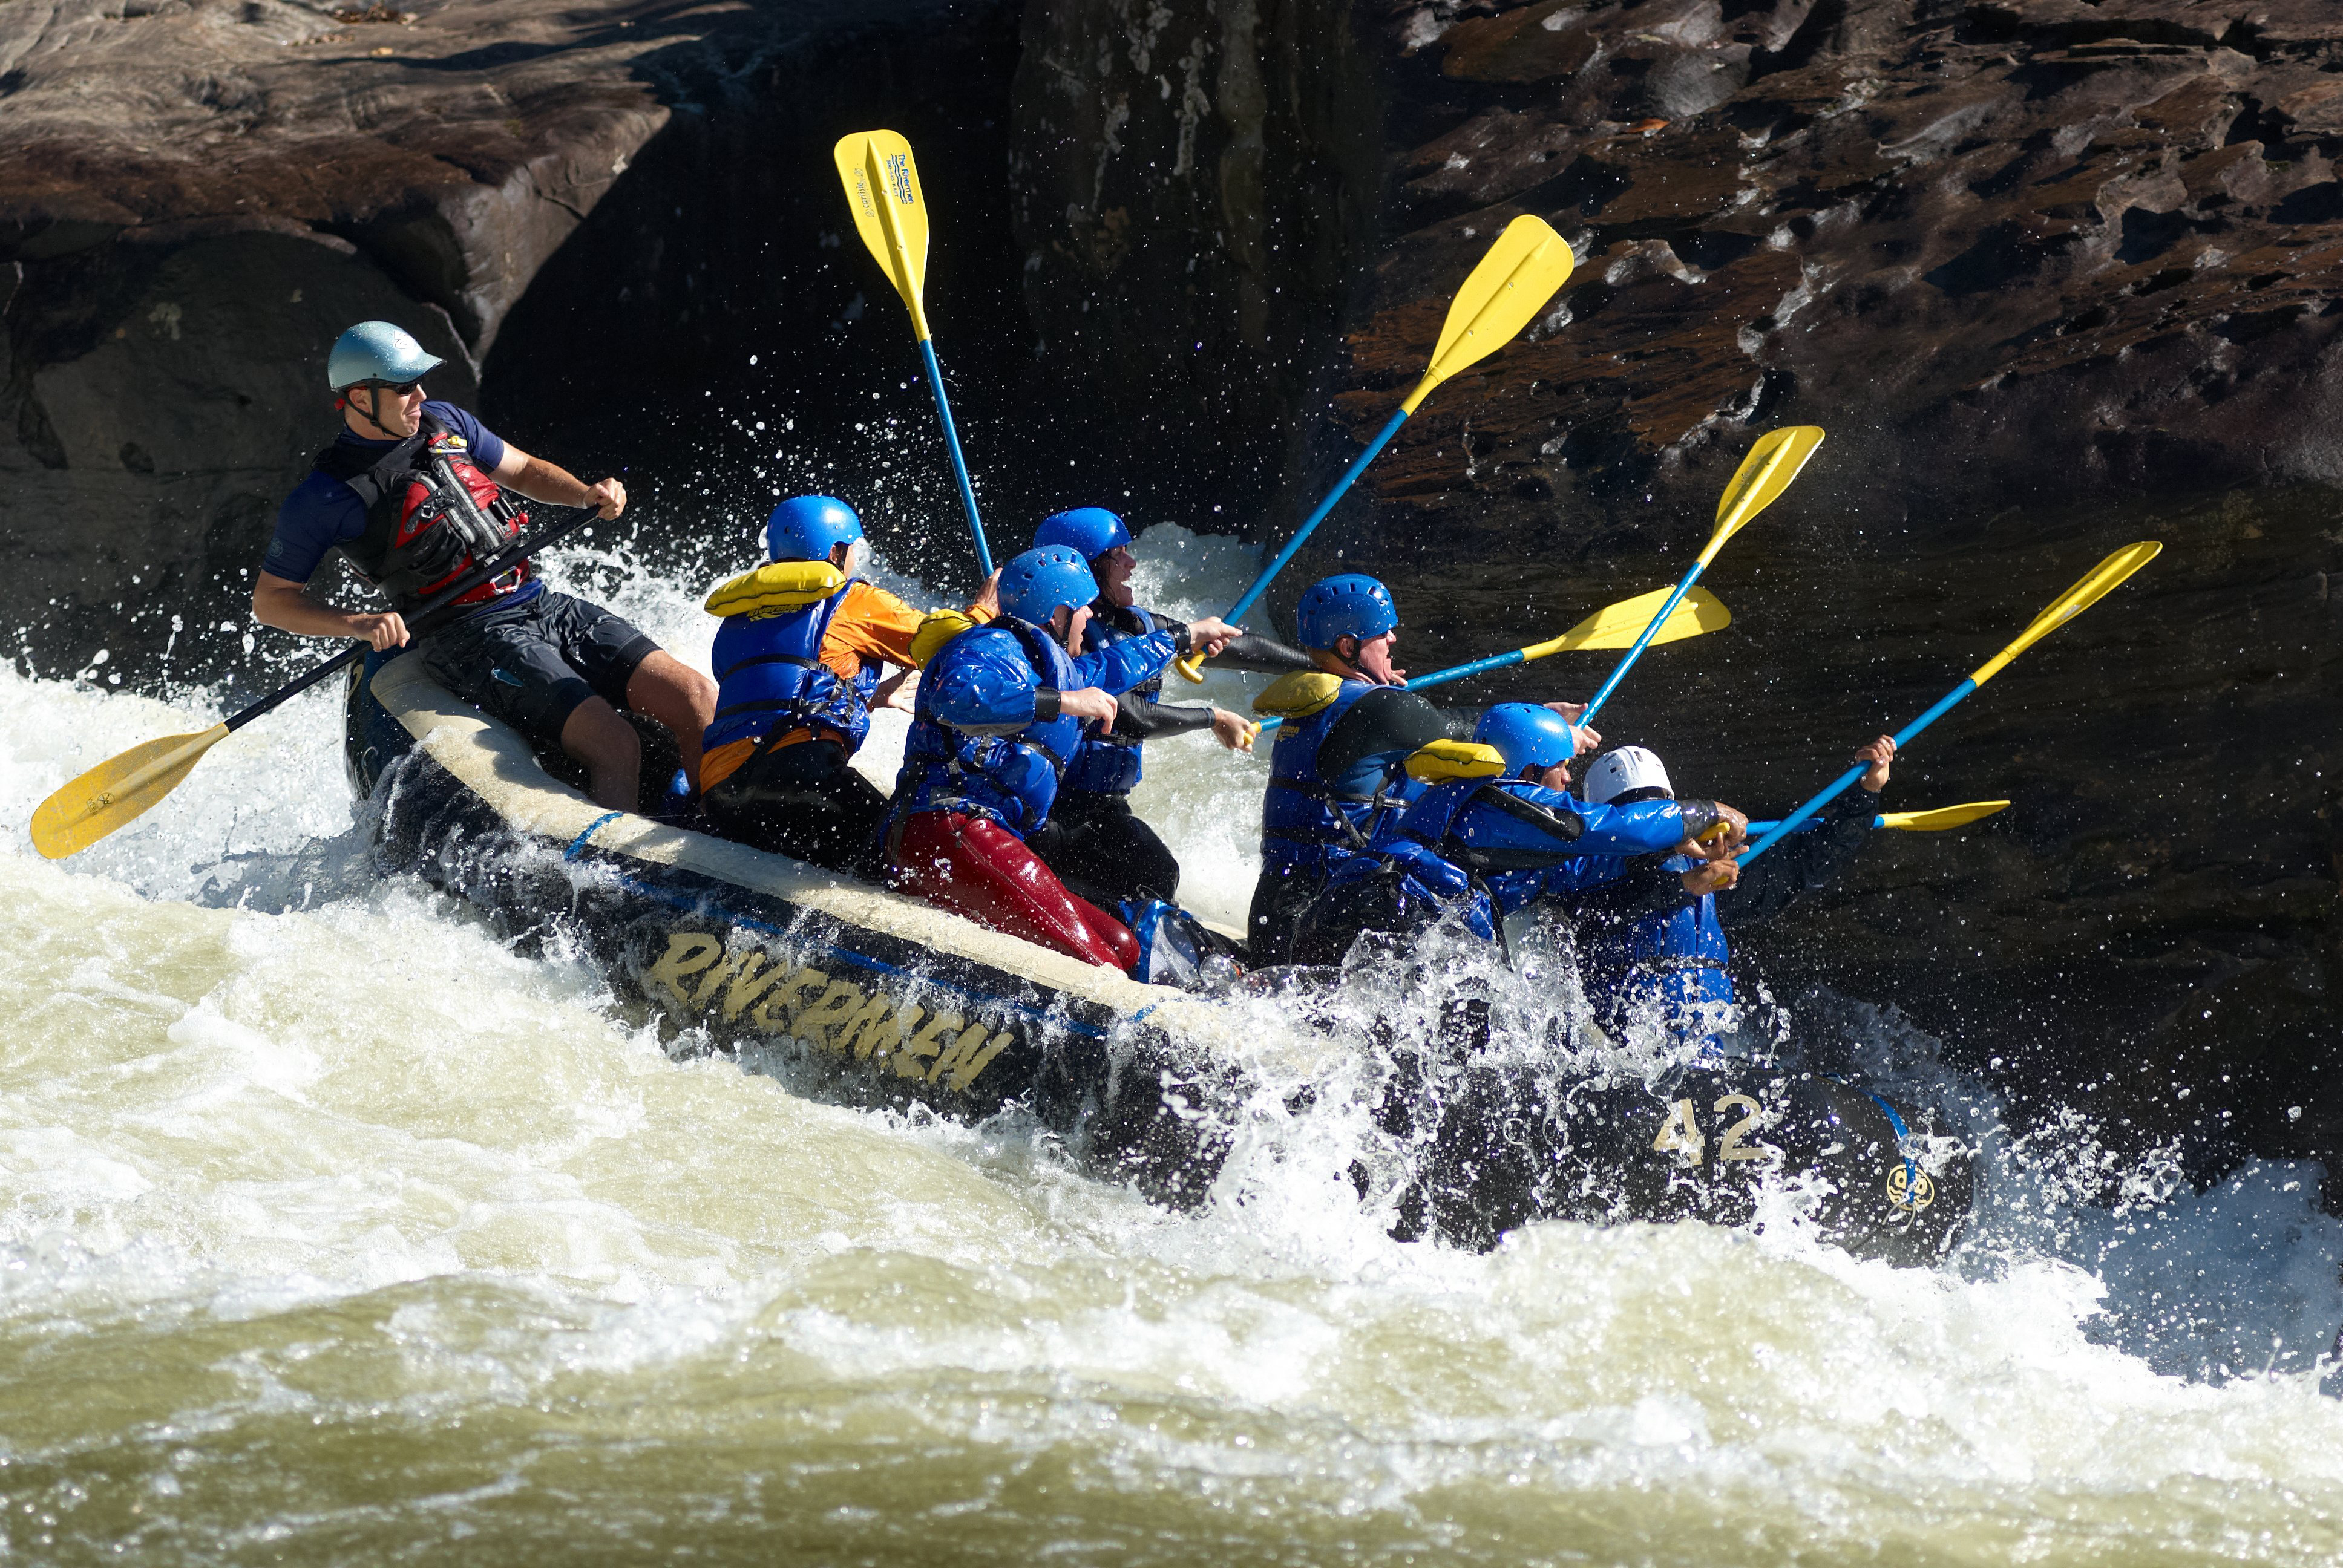 Tapping the rock at Pillow Rock rapid on the Gauley River